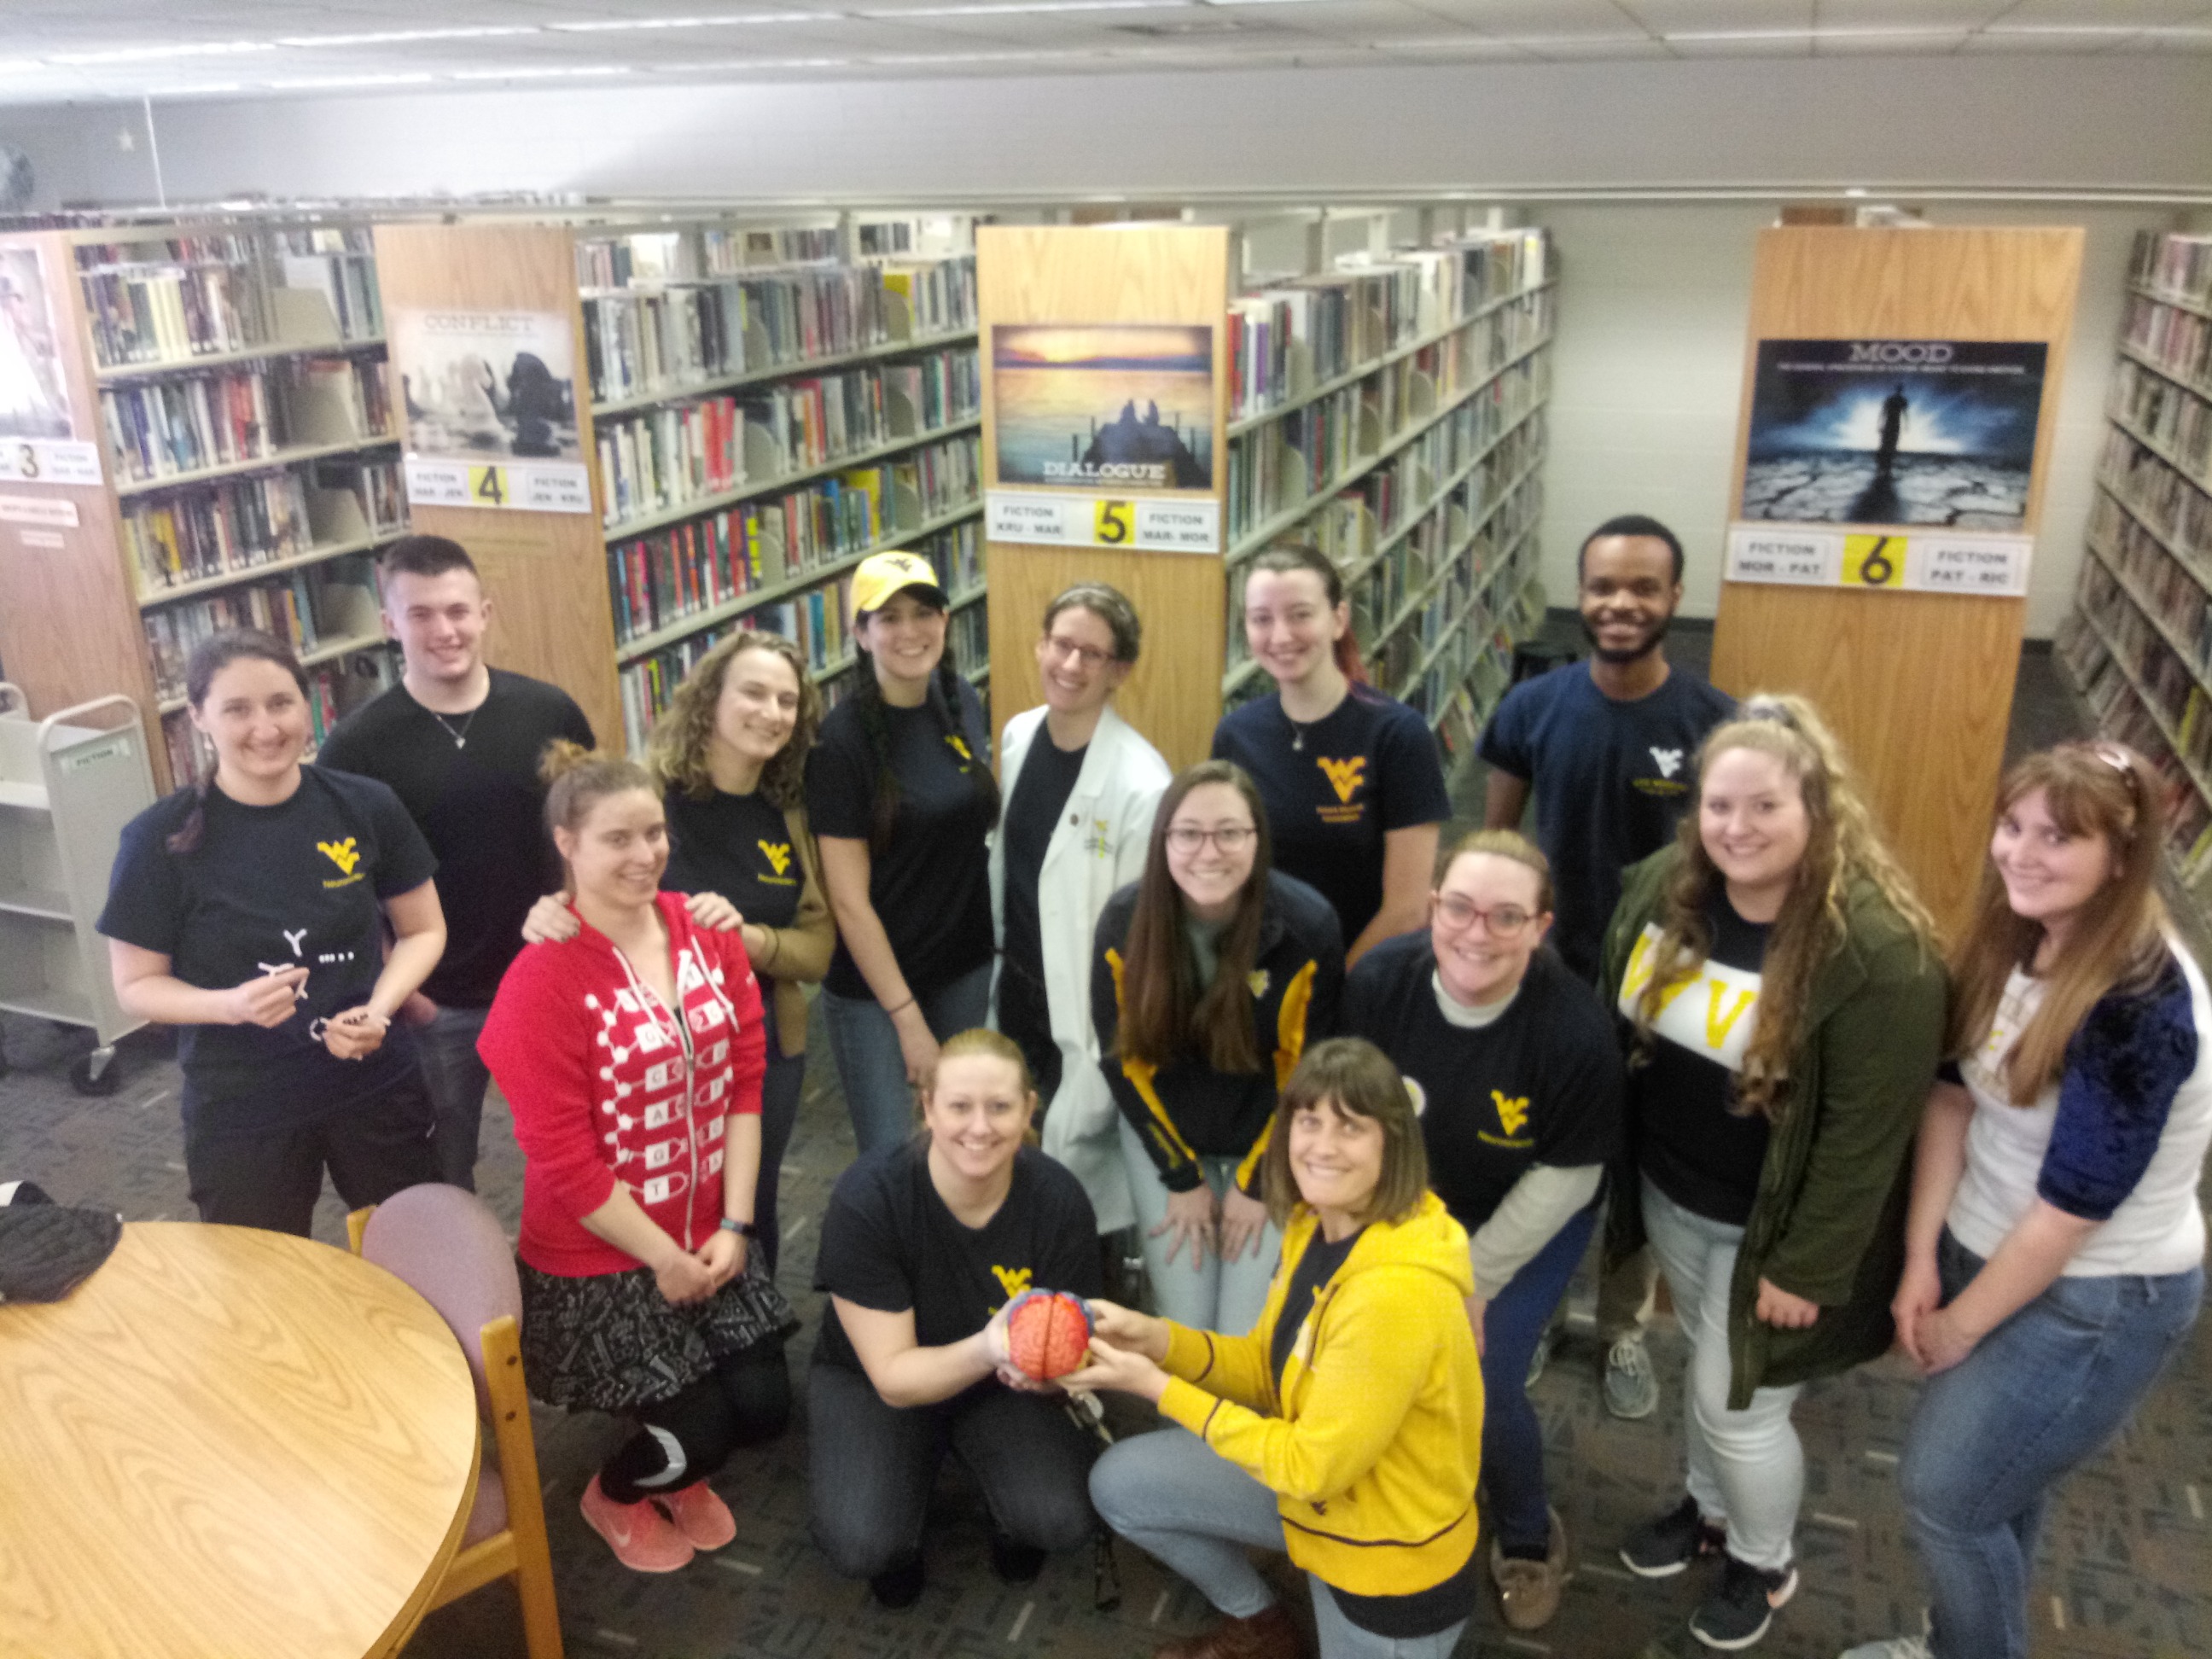 WVU Neuroscience Graduate Student Organization smiling in the library, holding a model of a brain